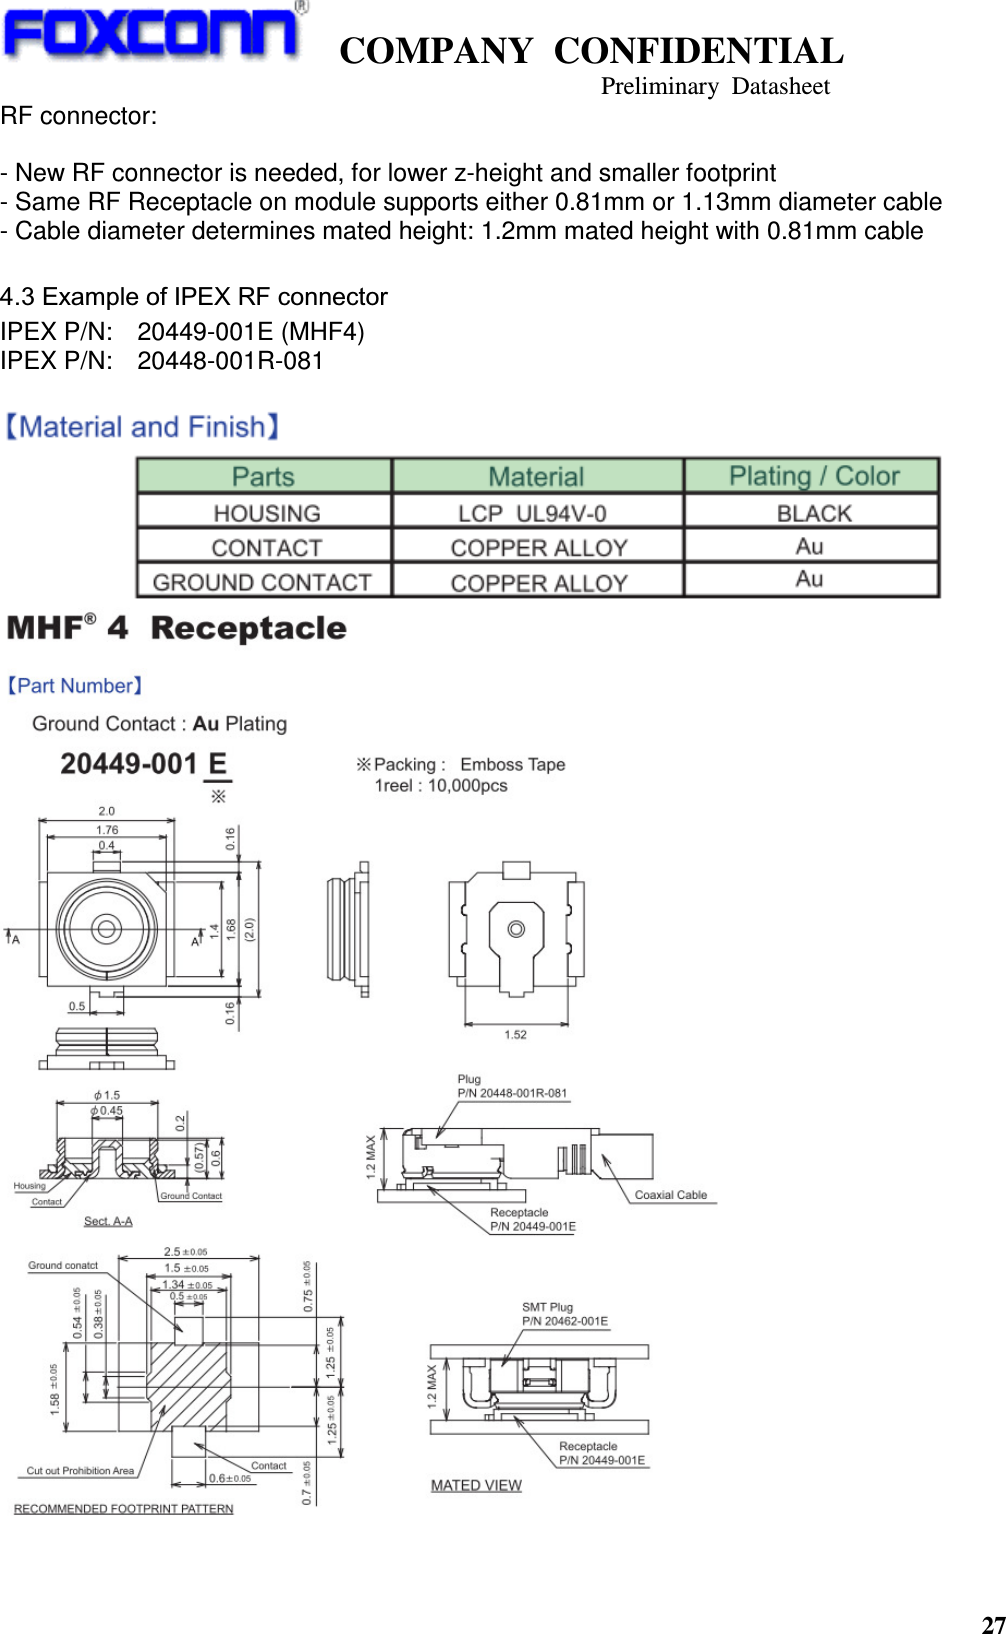    COMPANY  CONFIDENTIAL                                                                     Preliminary  Datasheet 27  RF connector:    - New RF connector is needed, for lower z-height and smaller footprint   - Same RF Receptacle on module supports either 0.81mm or 1.13mm diameter cable - Cable diameter determines mated height: 1.2mm mated height with 0.81mm cable  4.3 Example of IPEX RF connector IPEX P/N:    20449-001E (MHF4) IPEX P/N:    20448-001R-081     